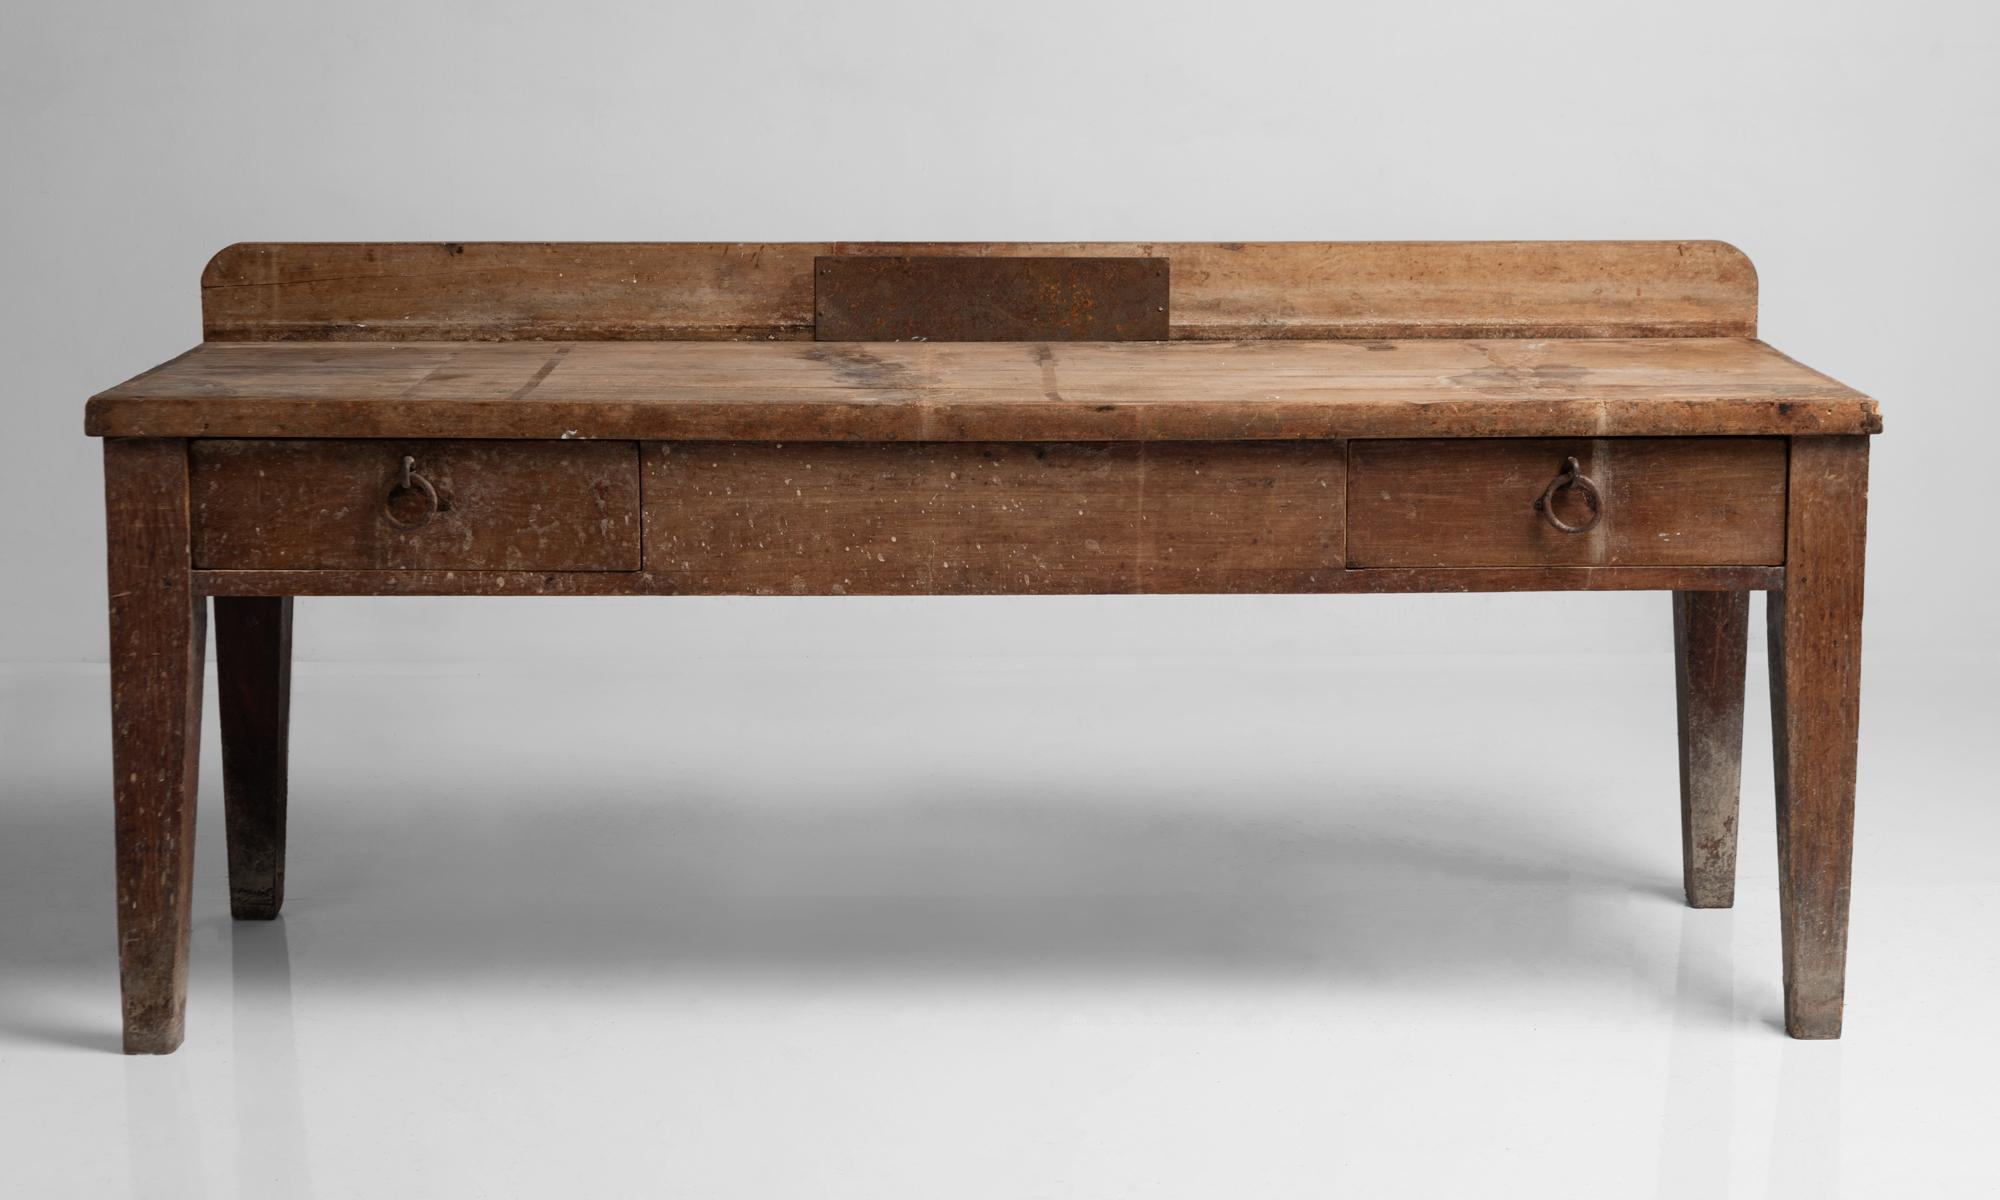 Primitive side board, France, 19th century.

Large rustic work table with oak plank construction and original iron hardware.